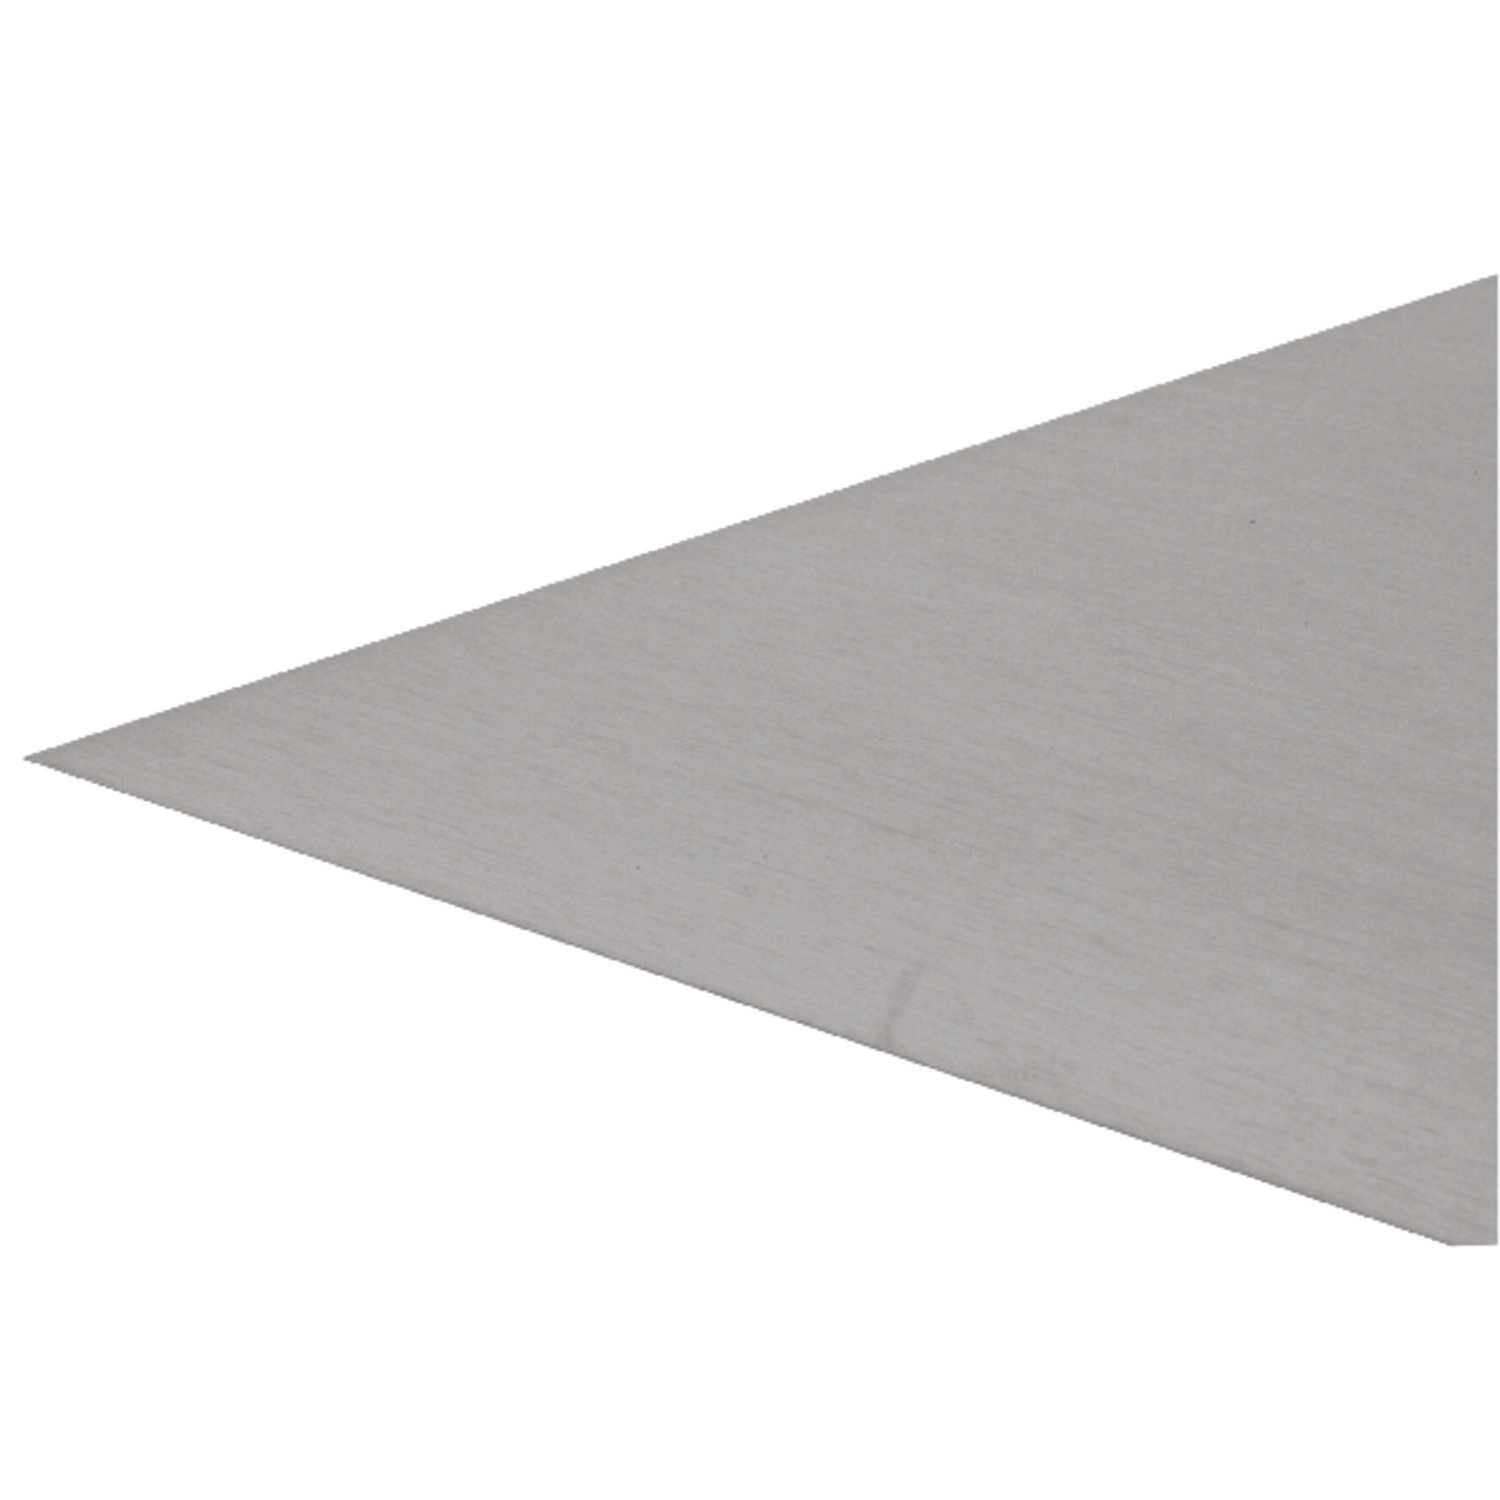 Boltmaster 0.02 in. x 24 in. W x 36 in. L Mill Aluminum Sheet Metal Ace Hardware